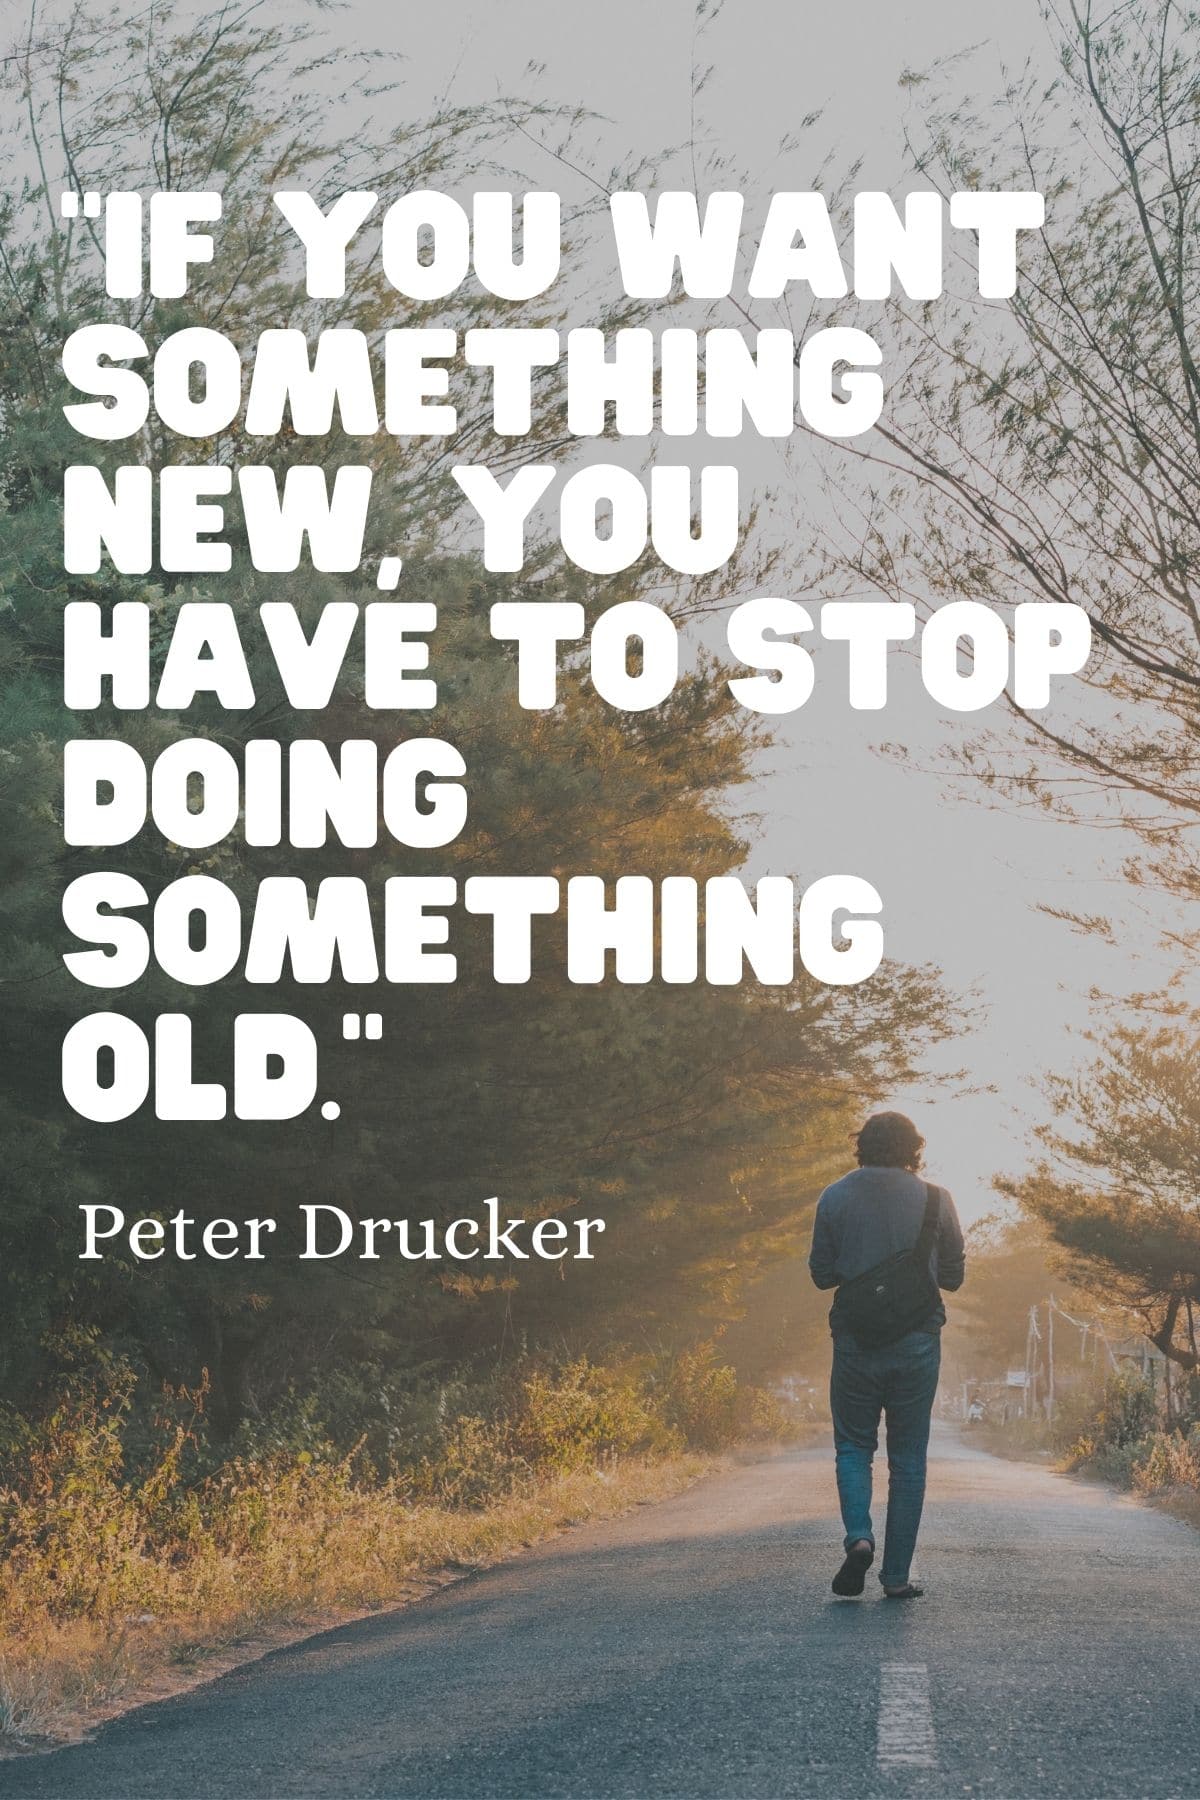 "If you want something new, you have to stop doing something old." – Peter Drucker new beginning quote